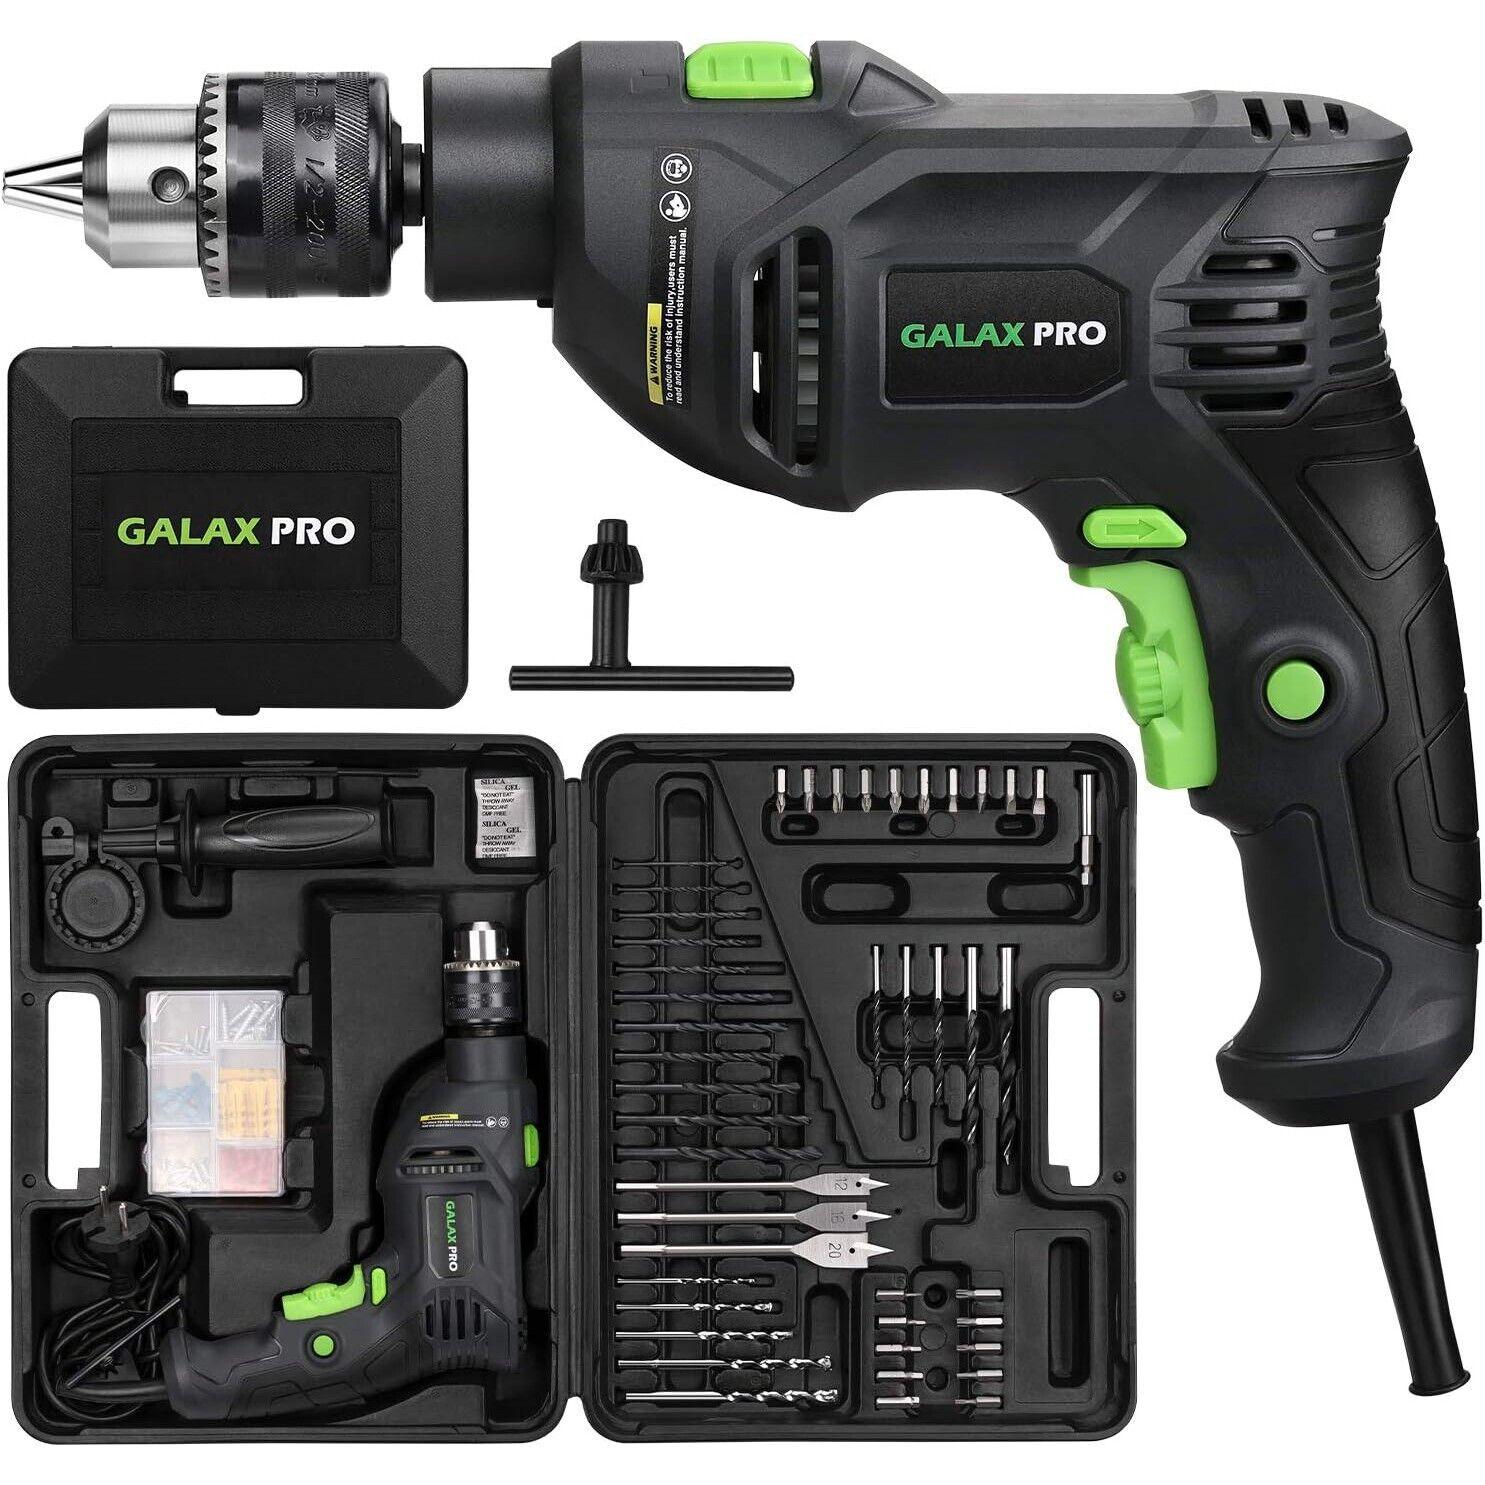 GALAX PRO Impact Drill, 1/2-inch Corded Hammer Drill, Variable Speed - Massive Discounts